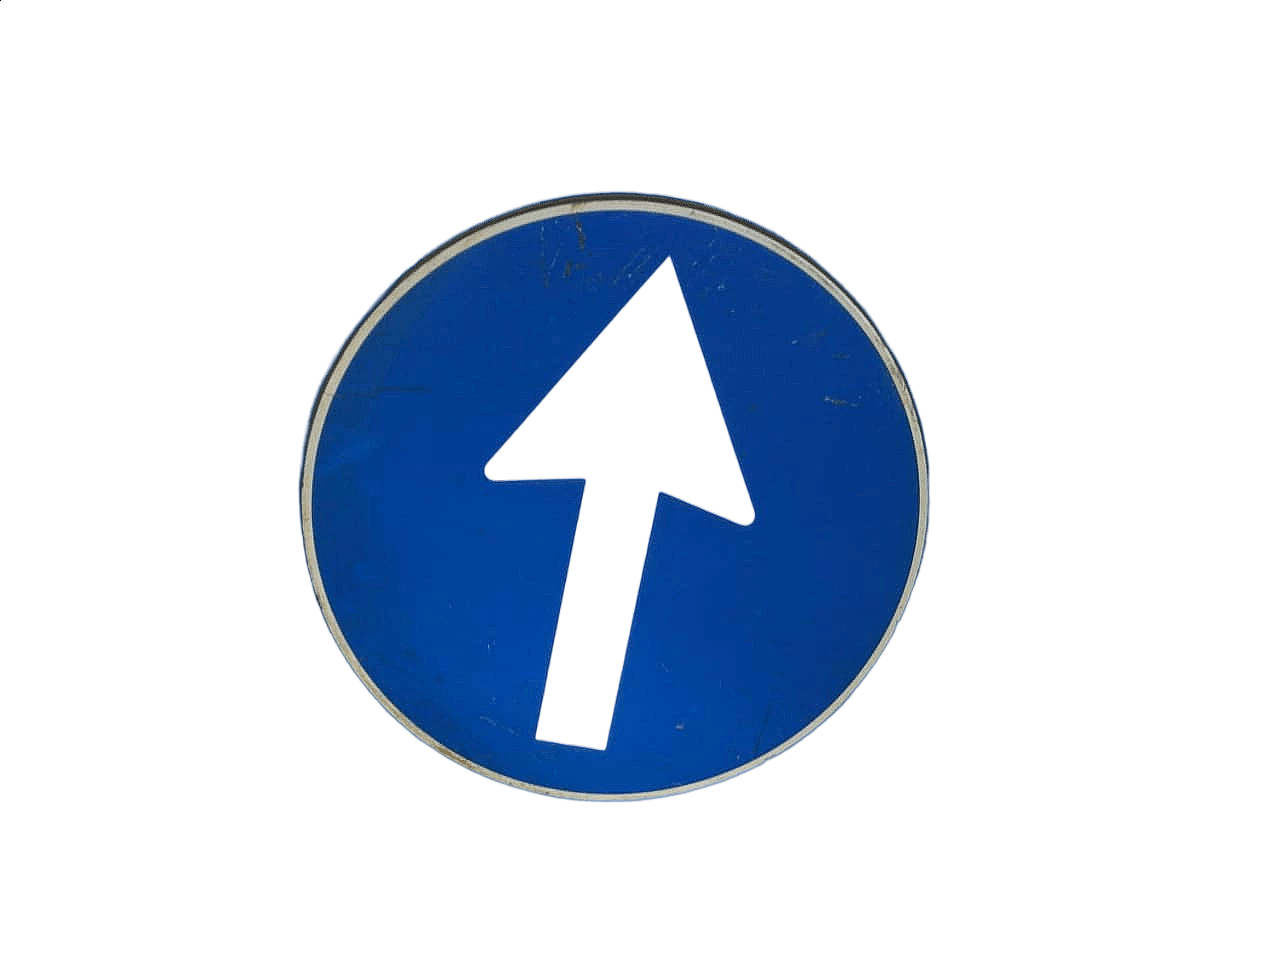 Road sign with directional arrow by Veneta snc 10